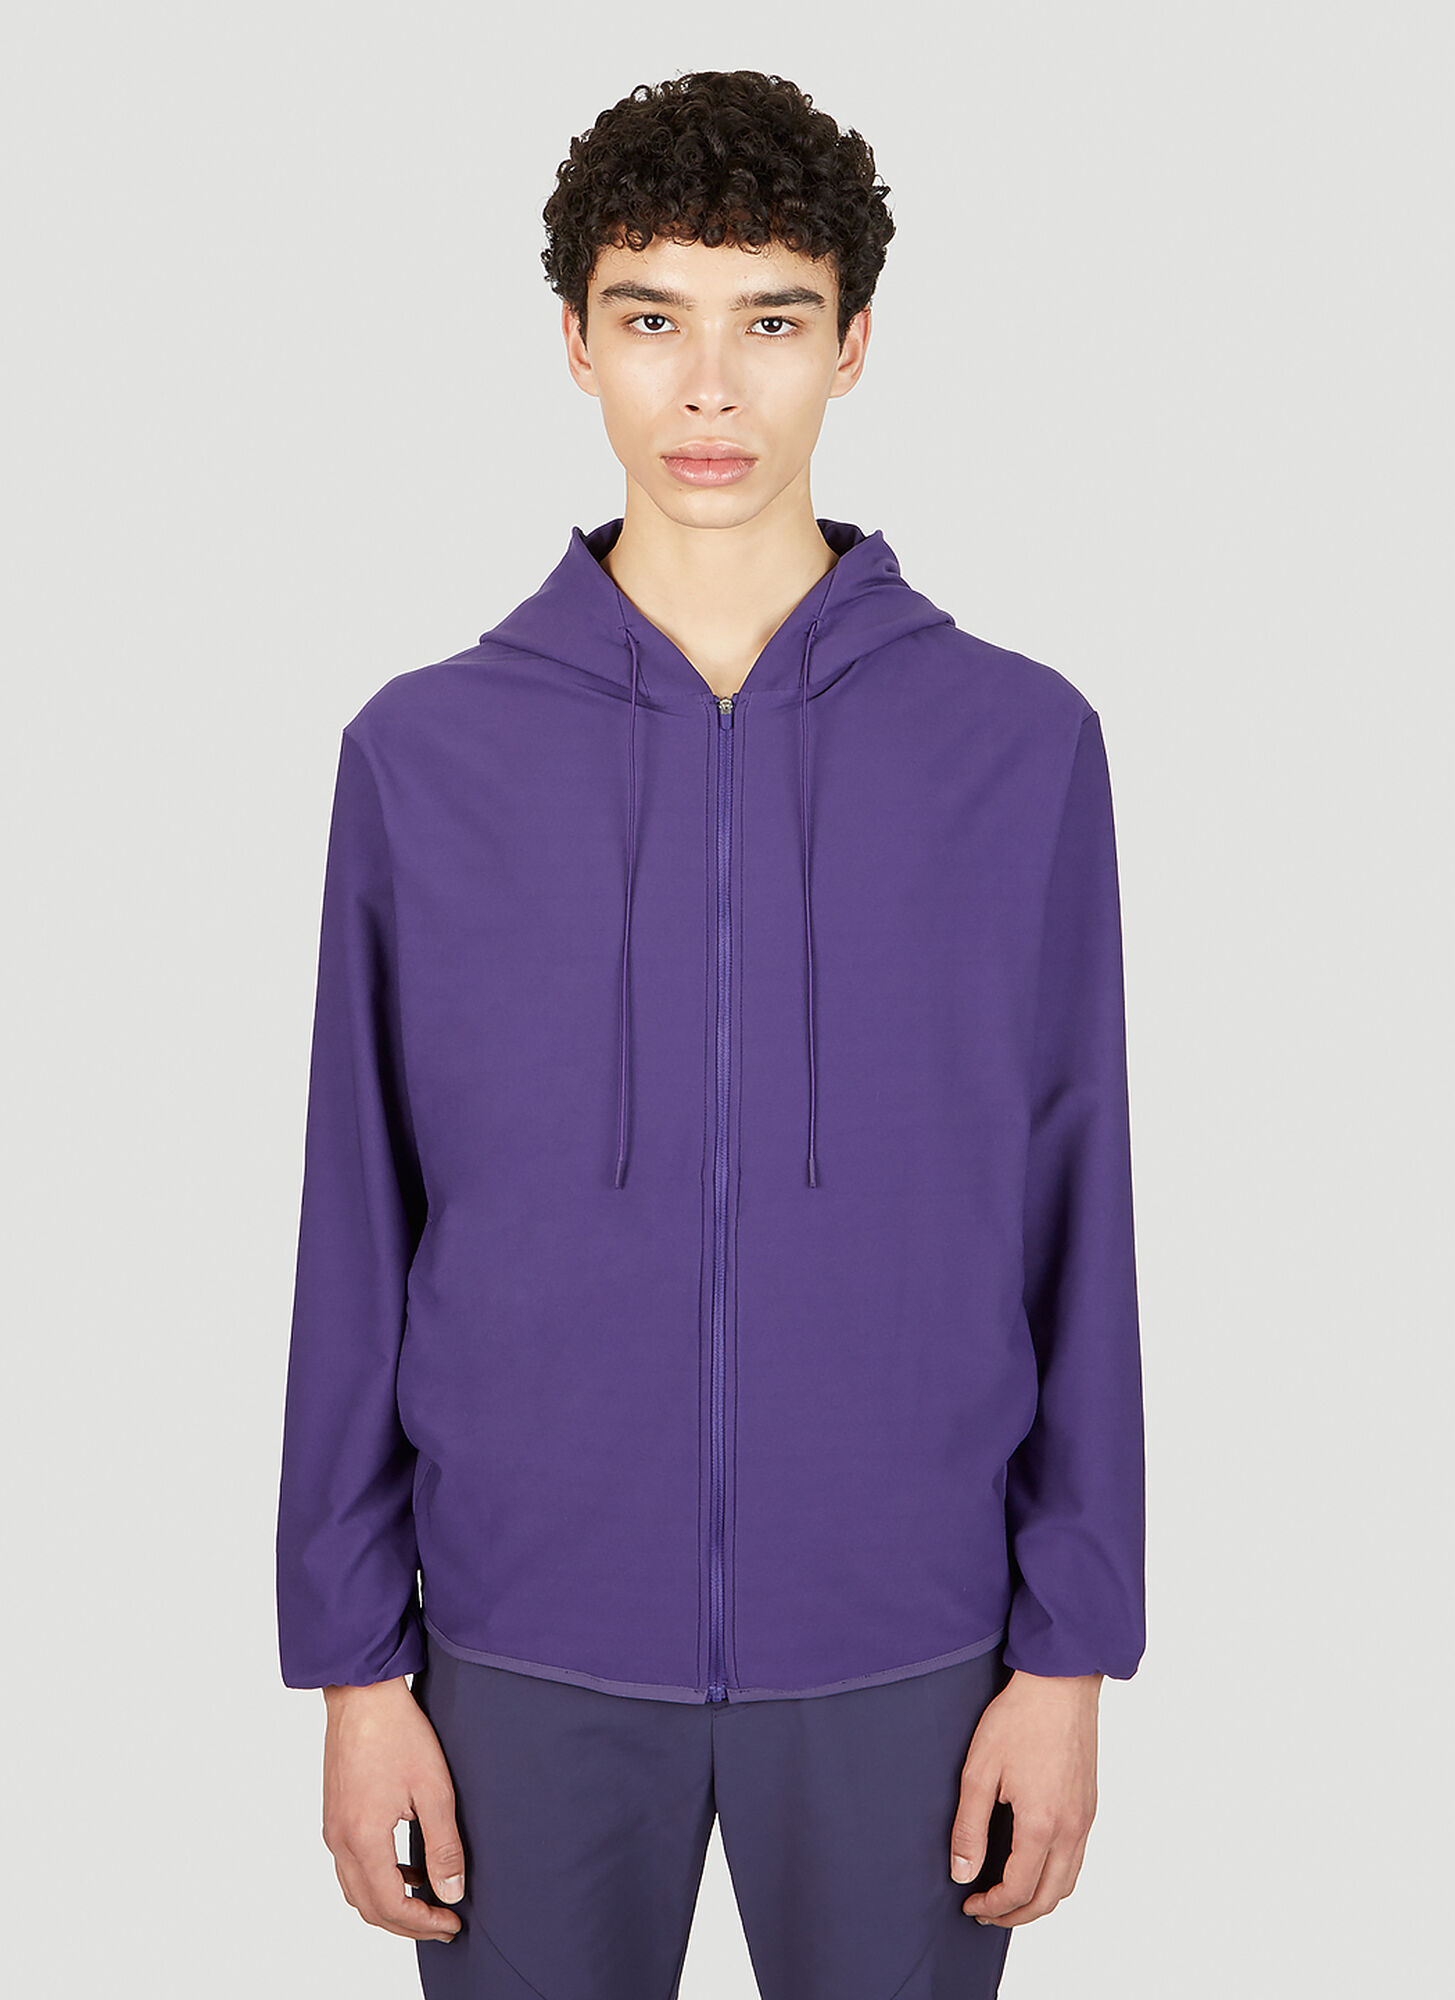 Post Archive Faction (paf) 5.0 Center Hooded Sweatshirt